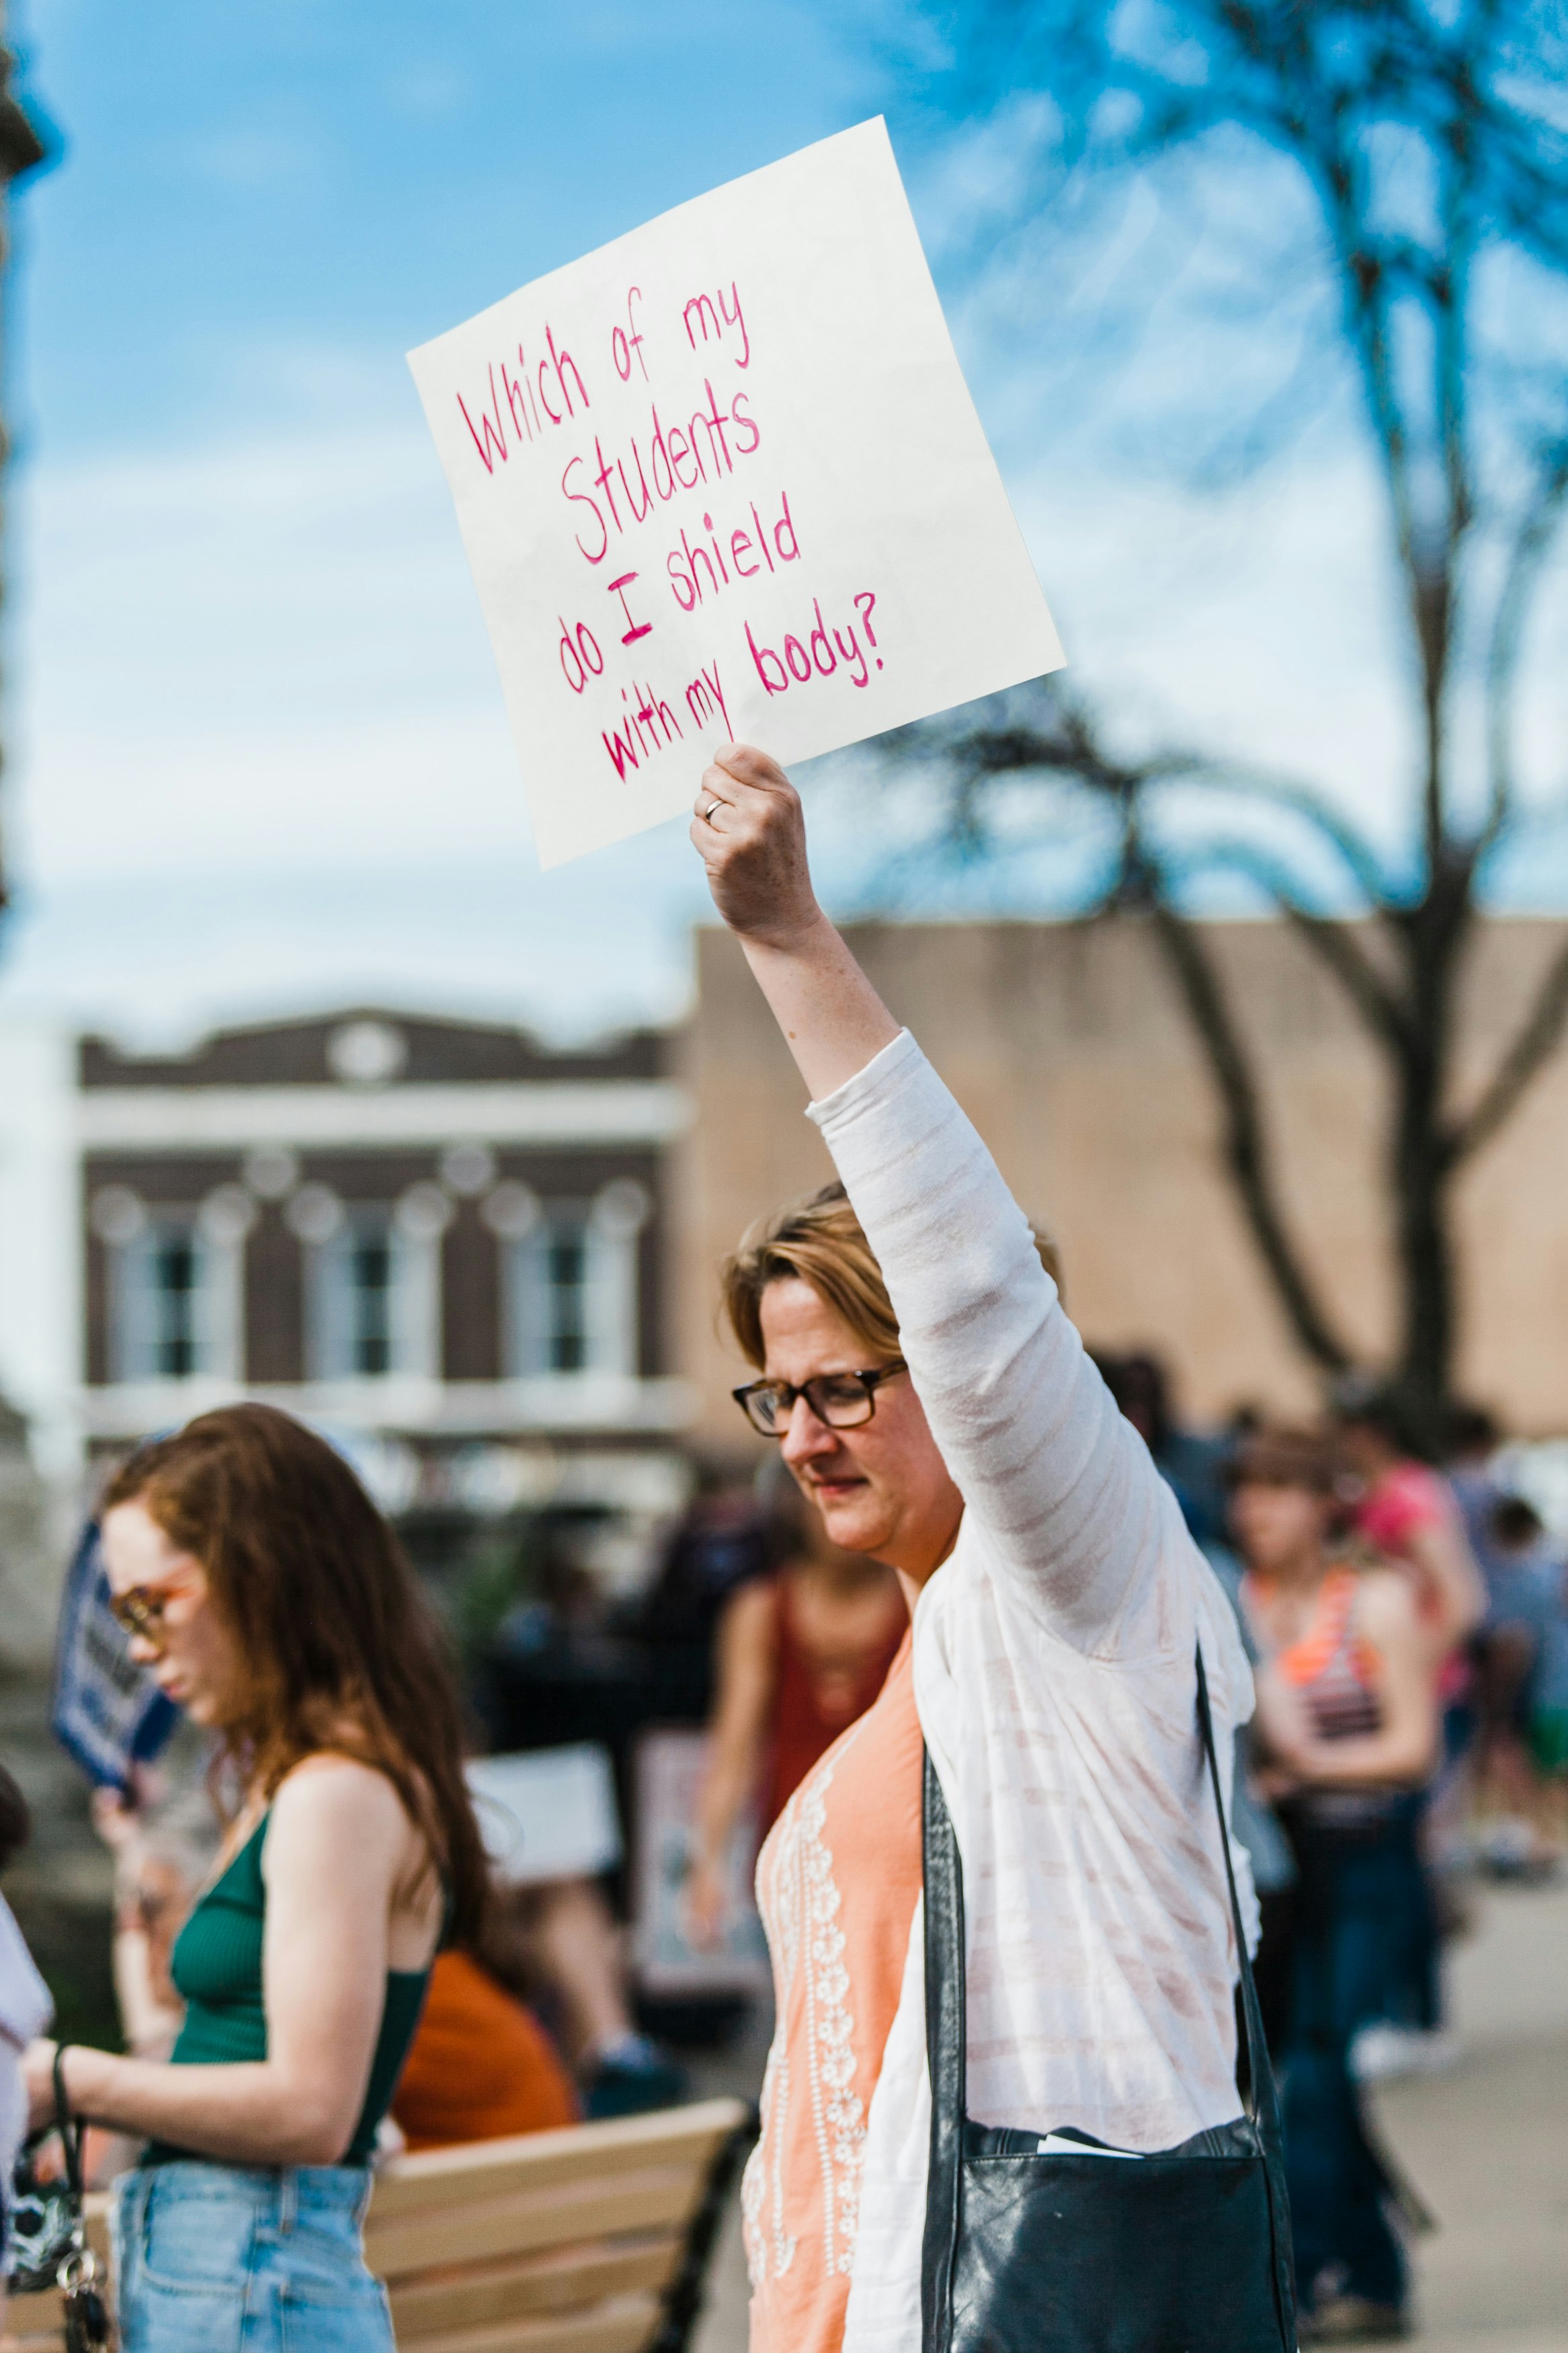 A North Texas teacher marching in the March for Our Lives rally held in Denton, Texas on March 24th, 2018.